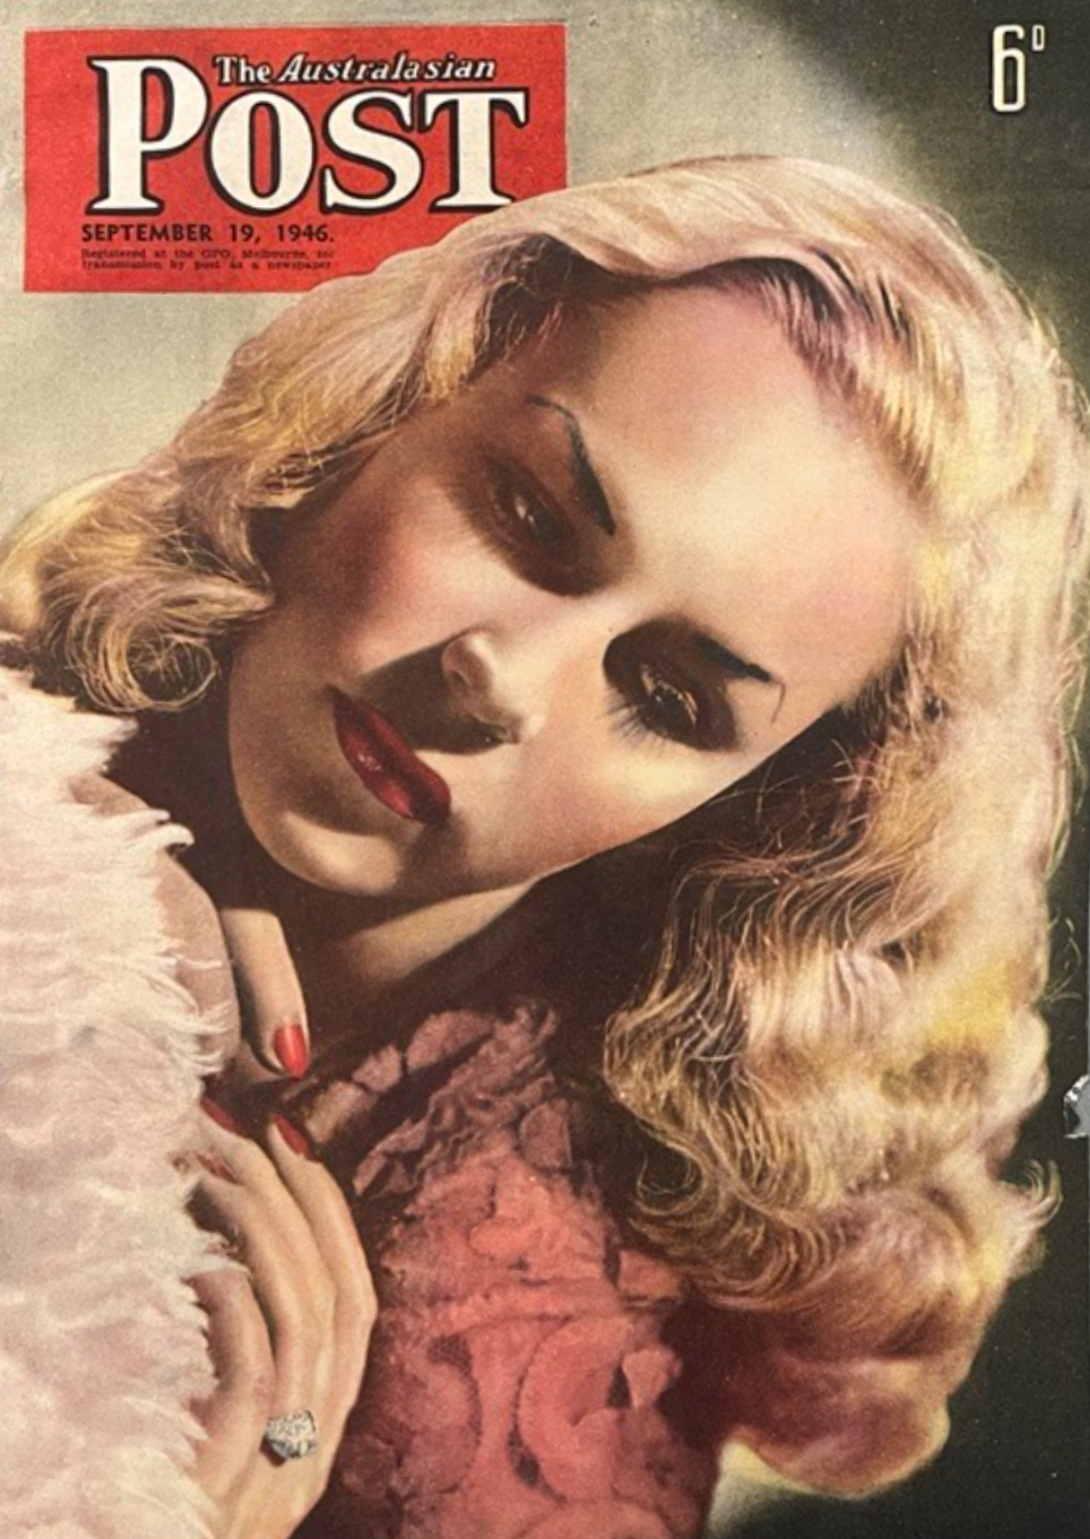 Cover of a magazine with a blonde woman in view form the shoulders up. She appears to be leaning around a pink fluffy cushion, and is wearing a red/pink shirt, red nail polish and a diamond ring